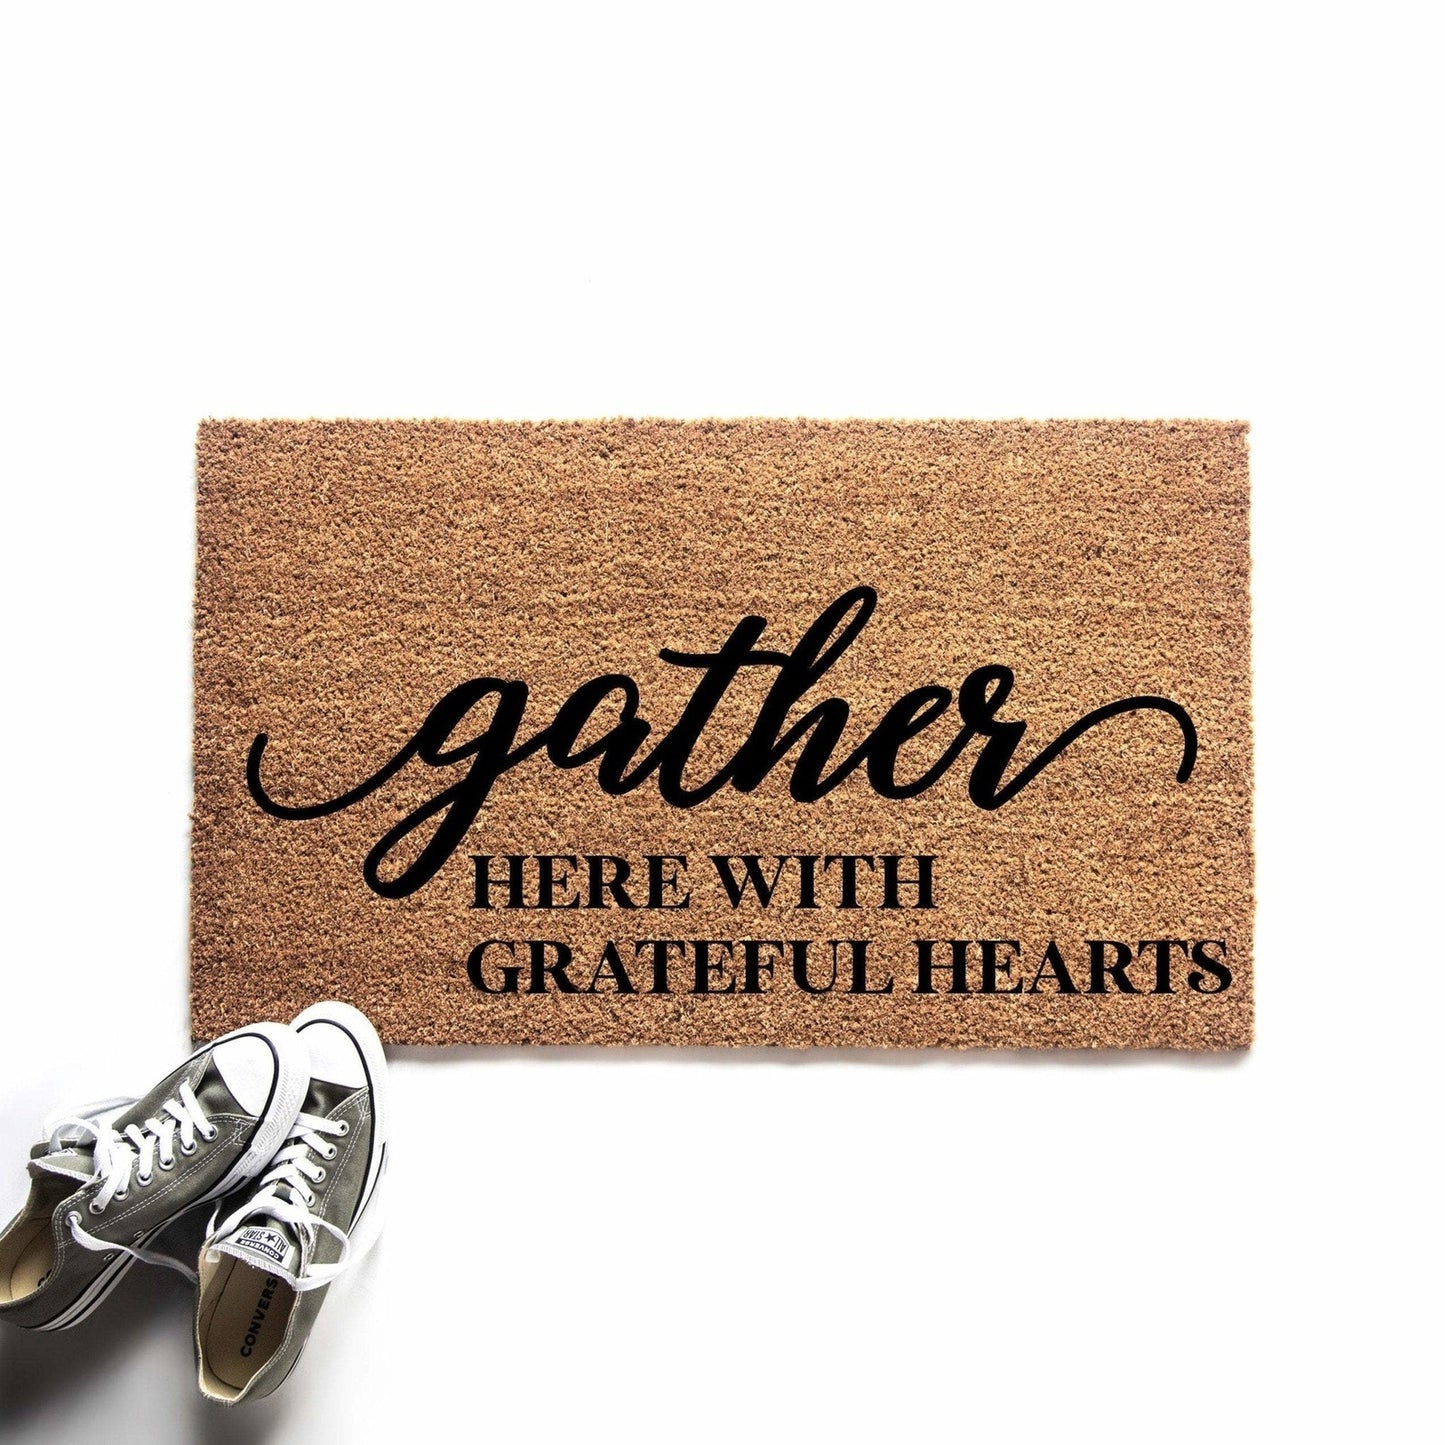 Gather Here With Grateful Hearts Doormat